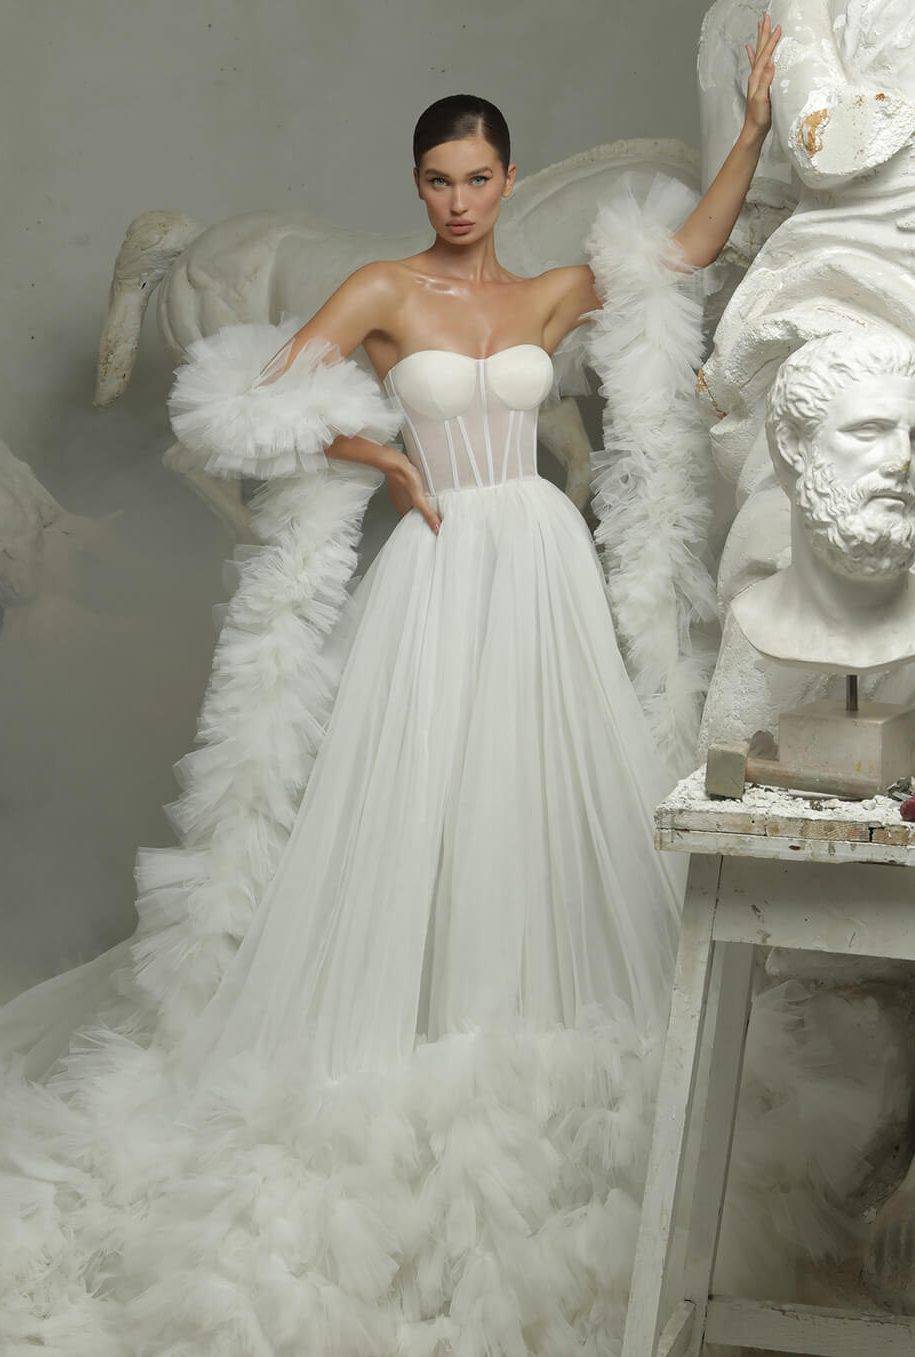 white gown with puffs and ruffles